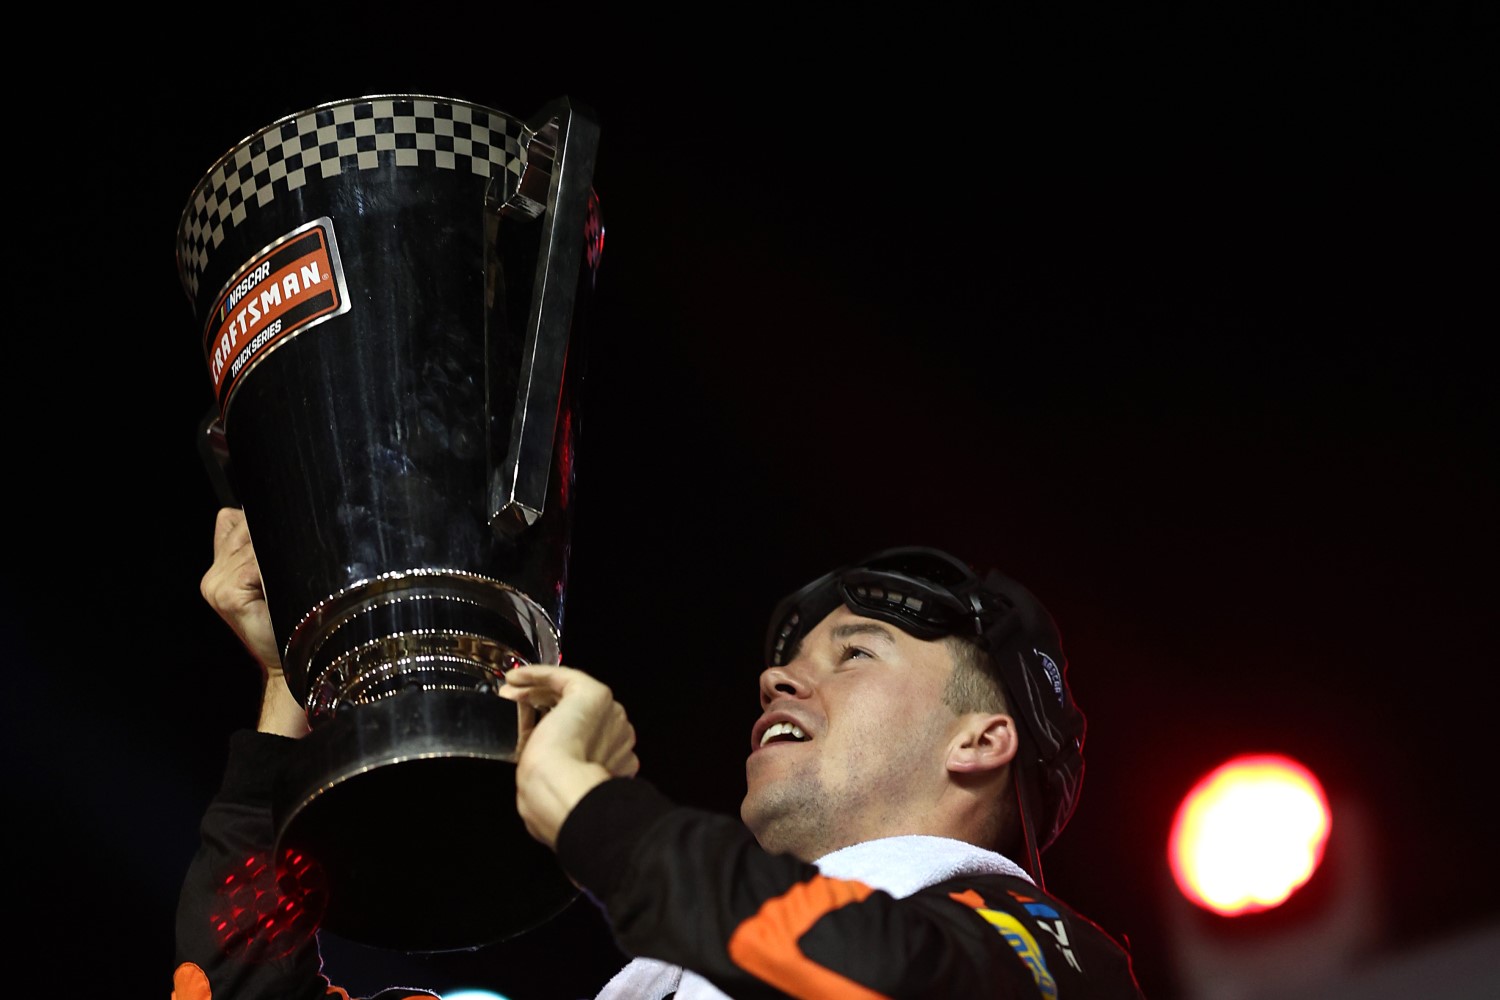 Ben Rhodes, driver of the #99 Kubota Ford, celebrates in victory lane after winning the 2023 NASCAR Craftsman Truck Series Championship, finishing first of the Championship 4 drivers in NASCAR Craftsman Truck Series Craftsman 150 at Phoenix Raceway on November 03, 2023 in Avondale, Arizona. (Photo by Jared C. Tilton/Getty Images)